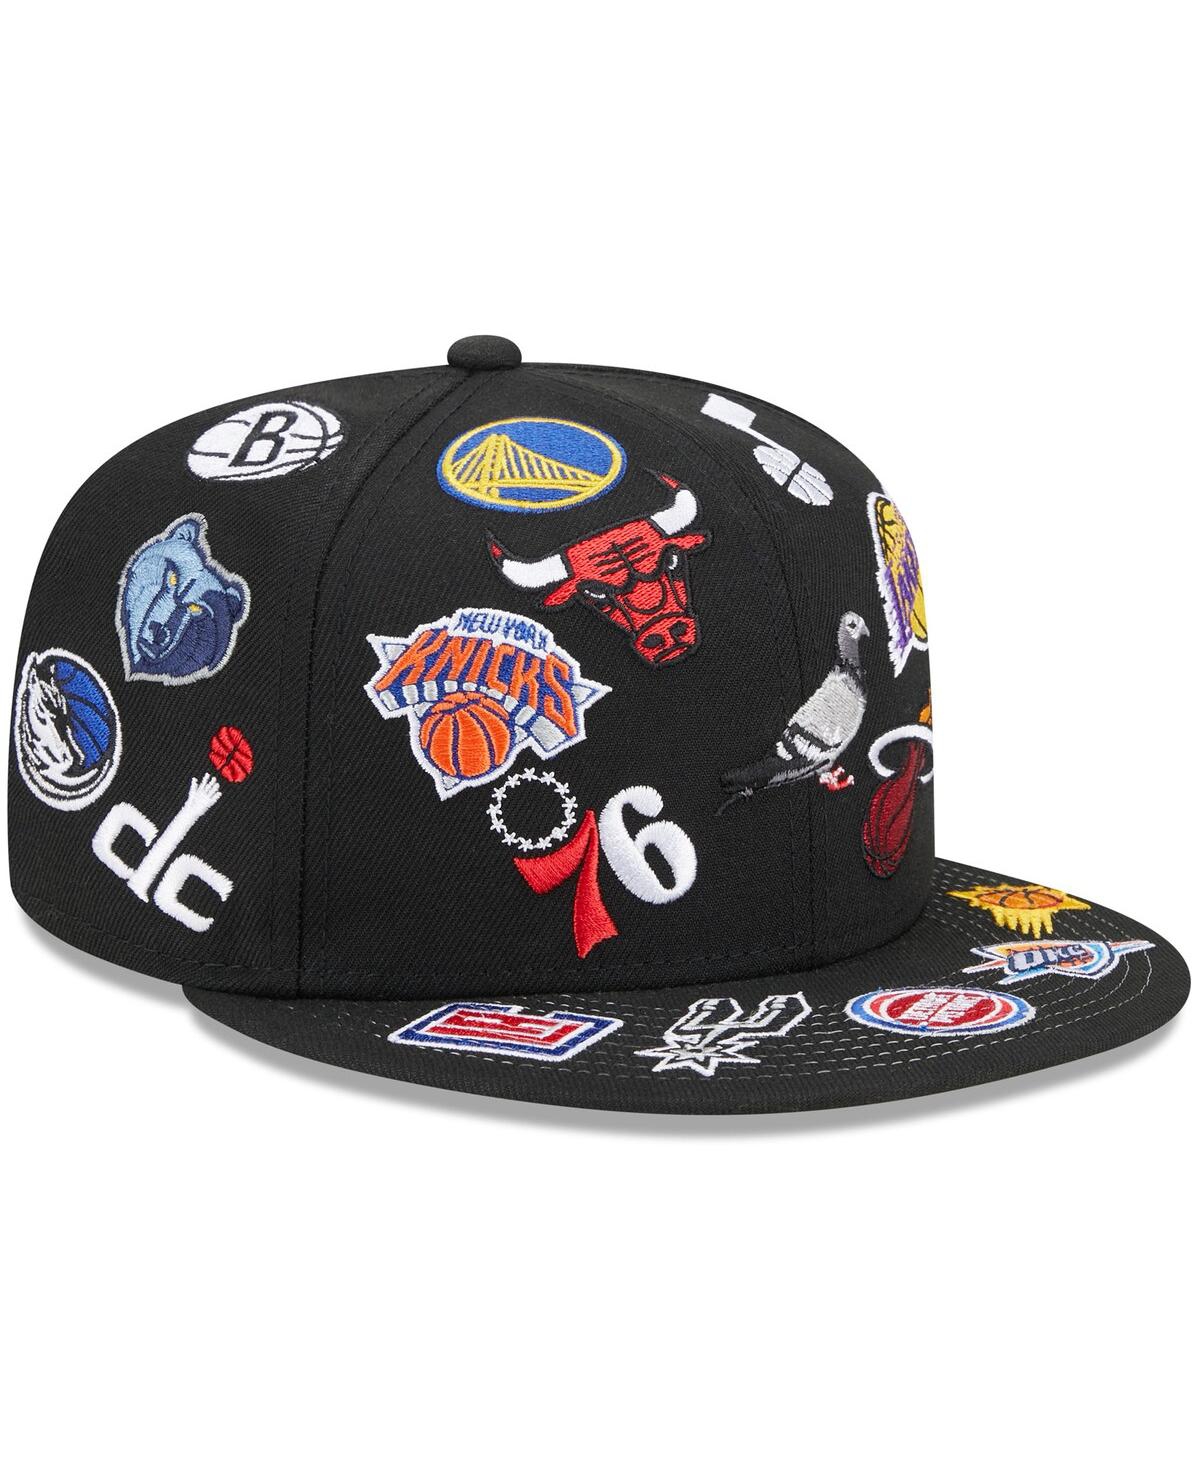 Staple Men's New Era Black Nba X  59fifty Fitted Hat